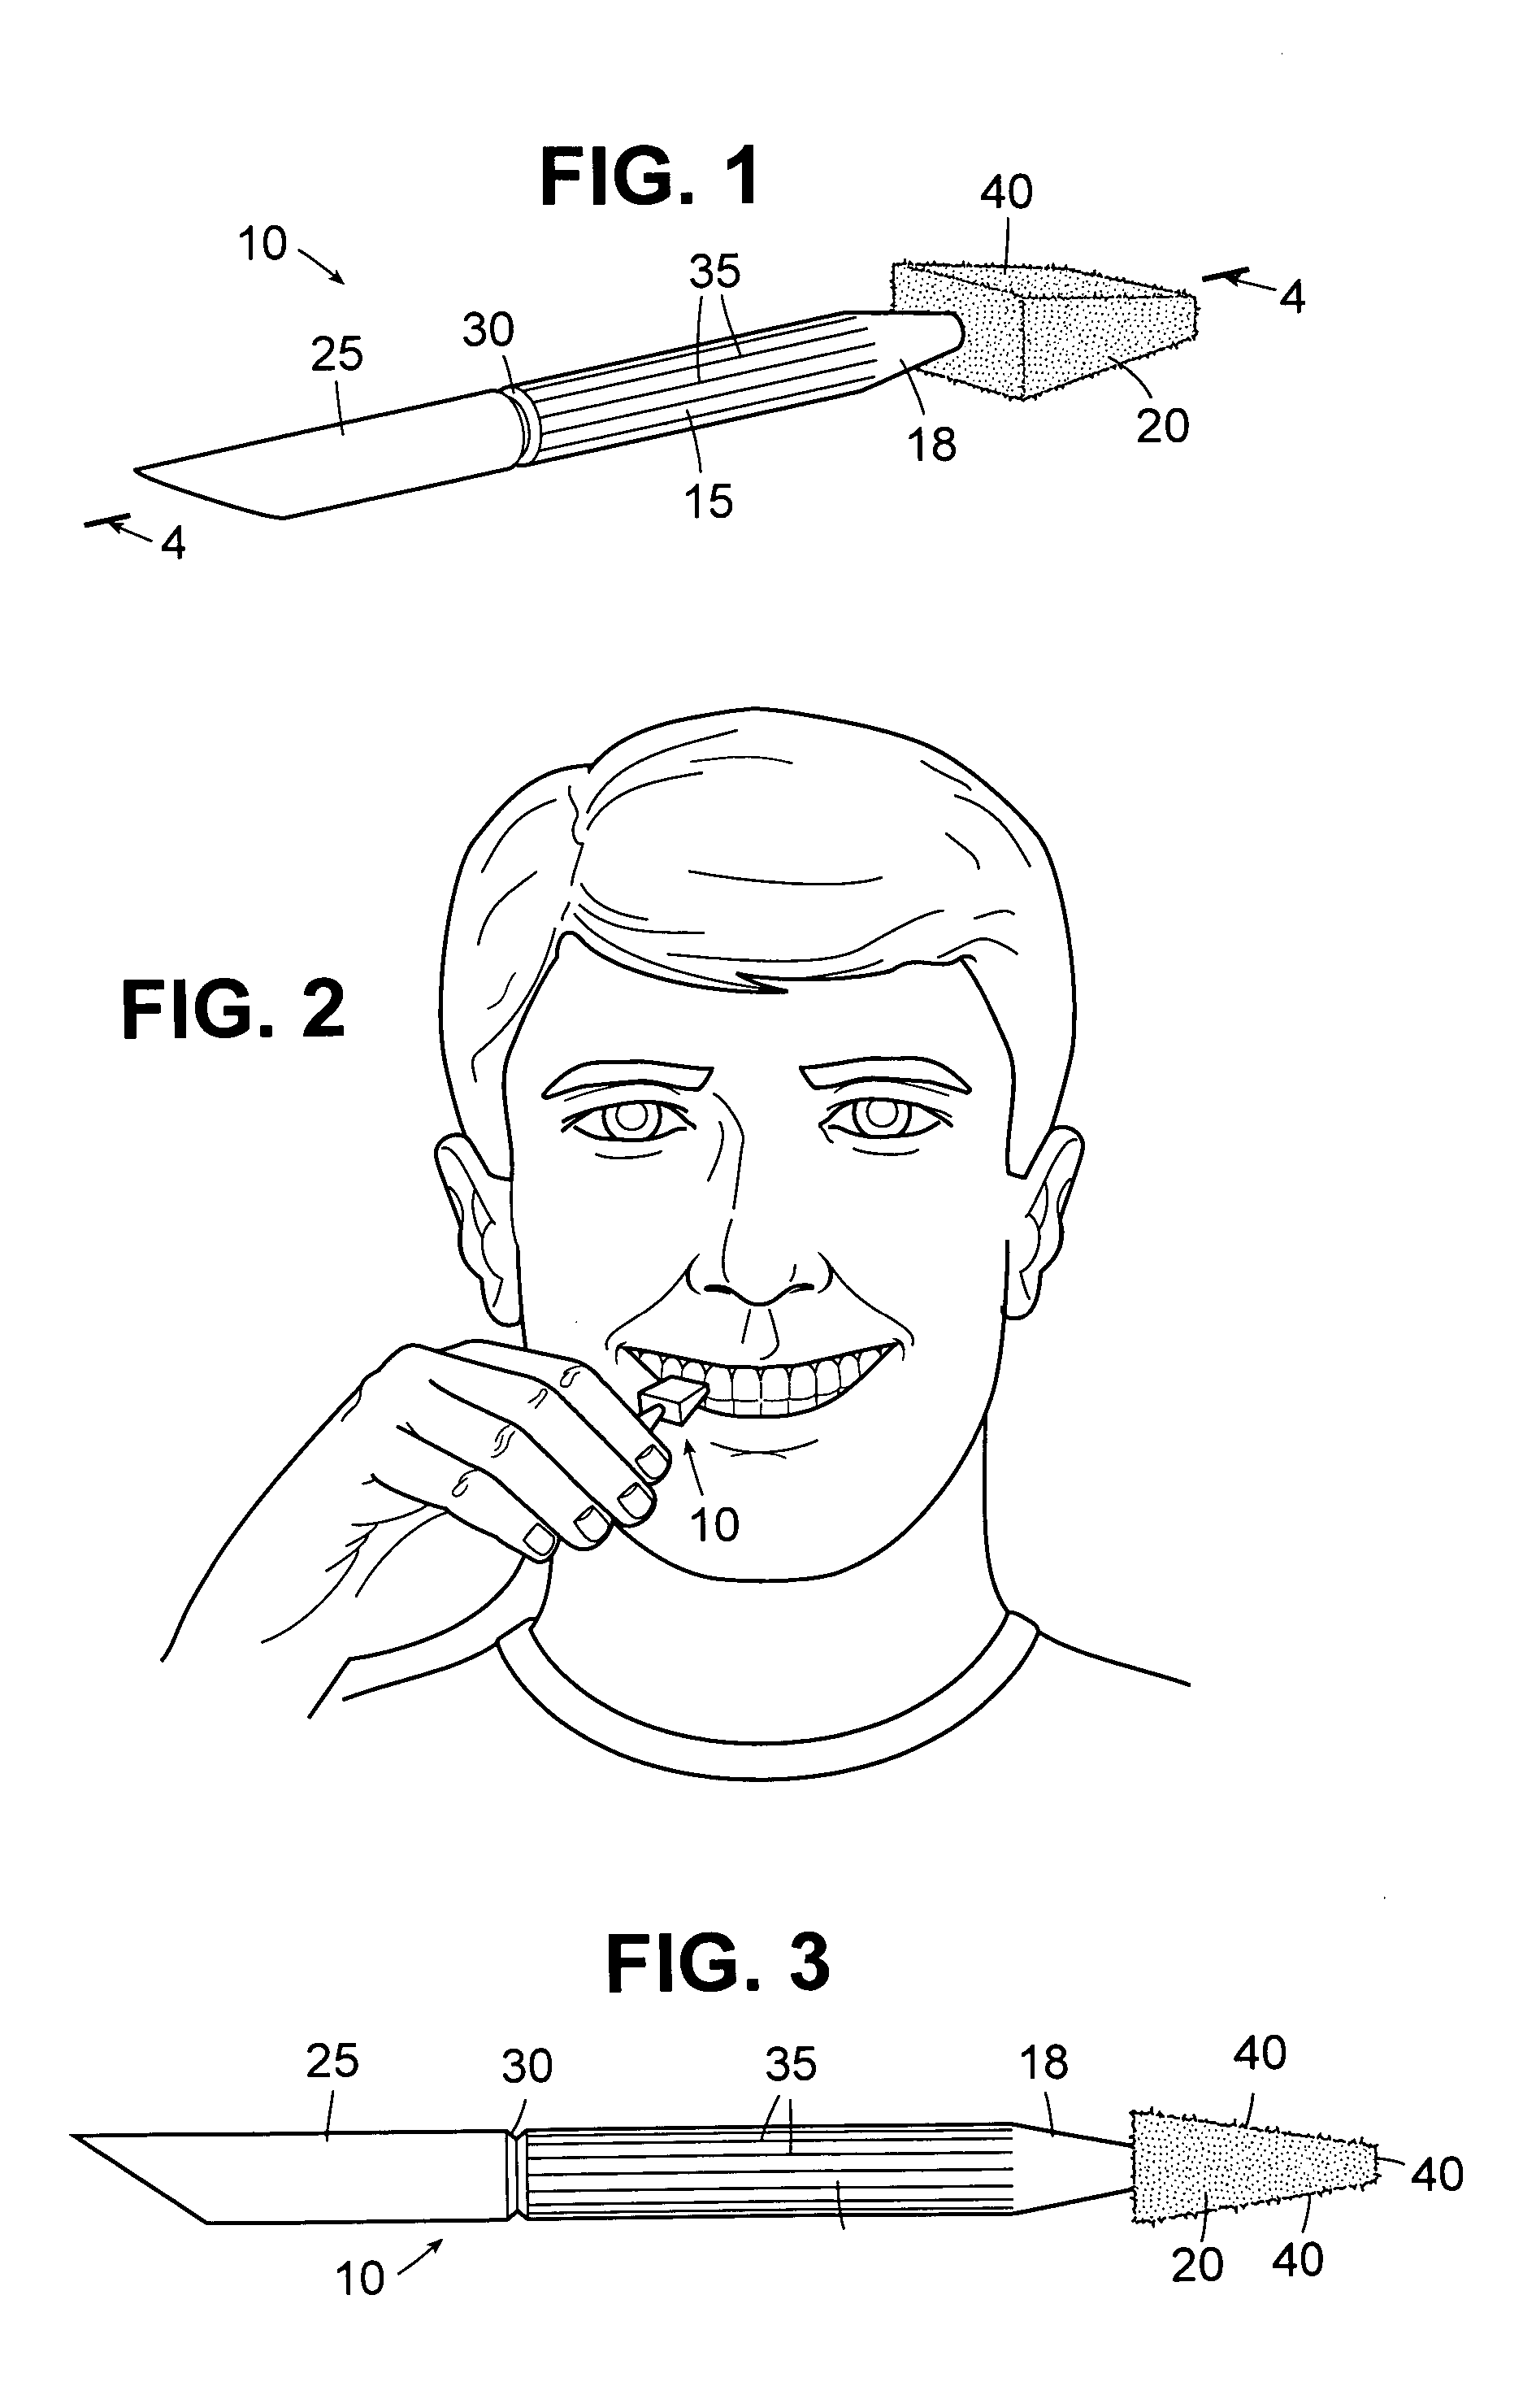 Applicator for cleaning teeth